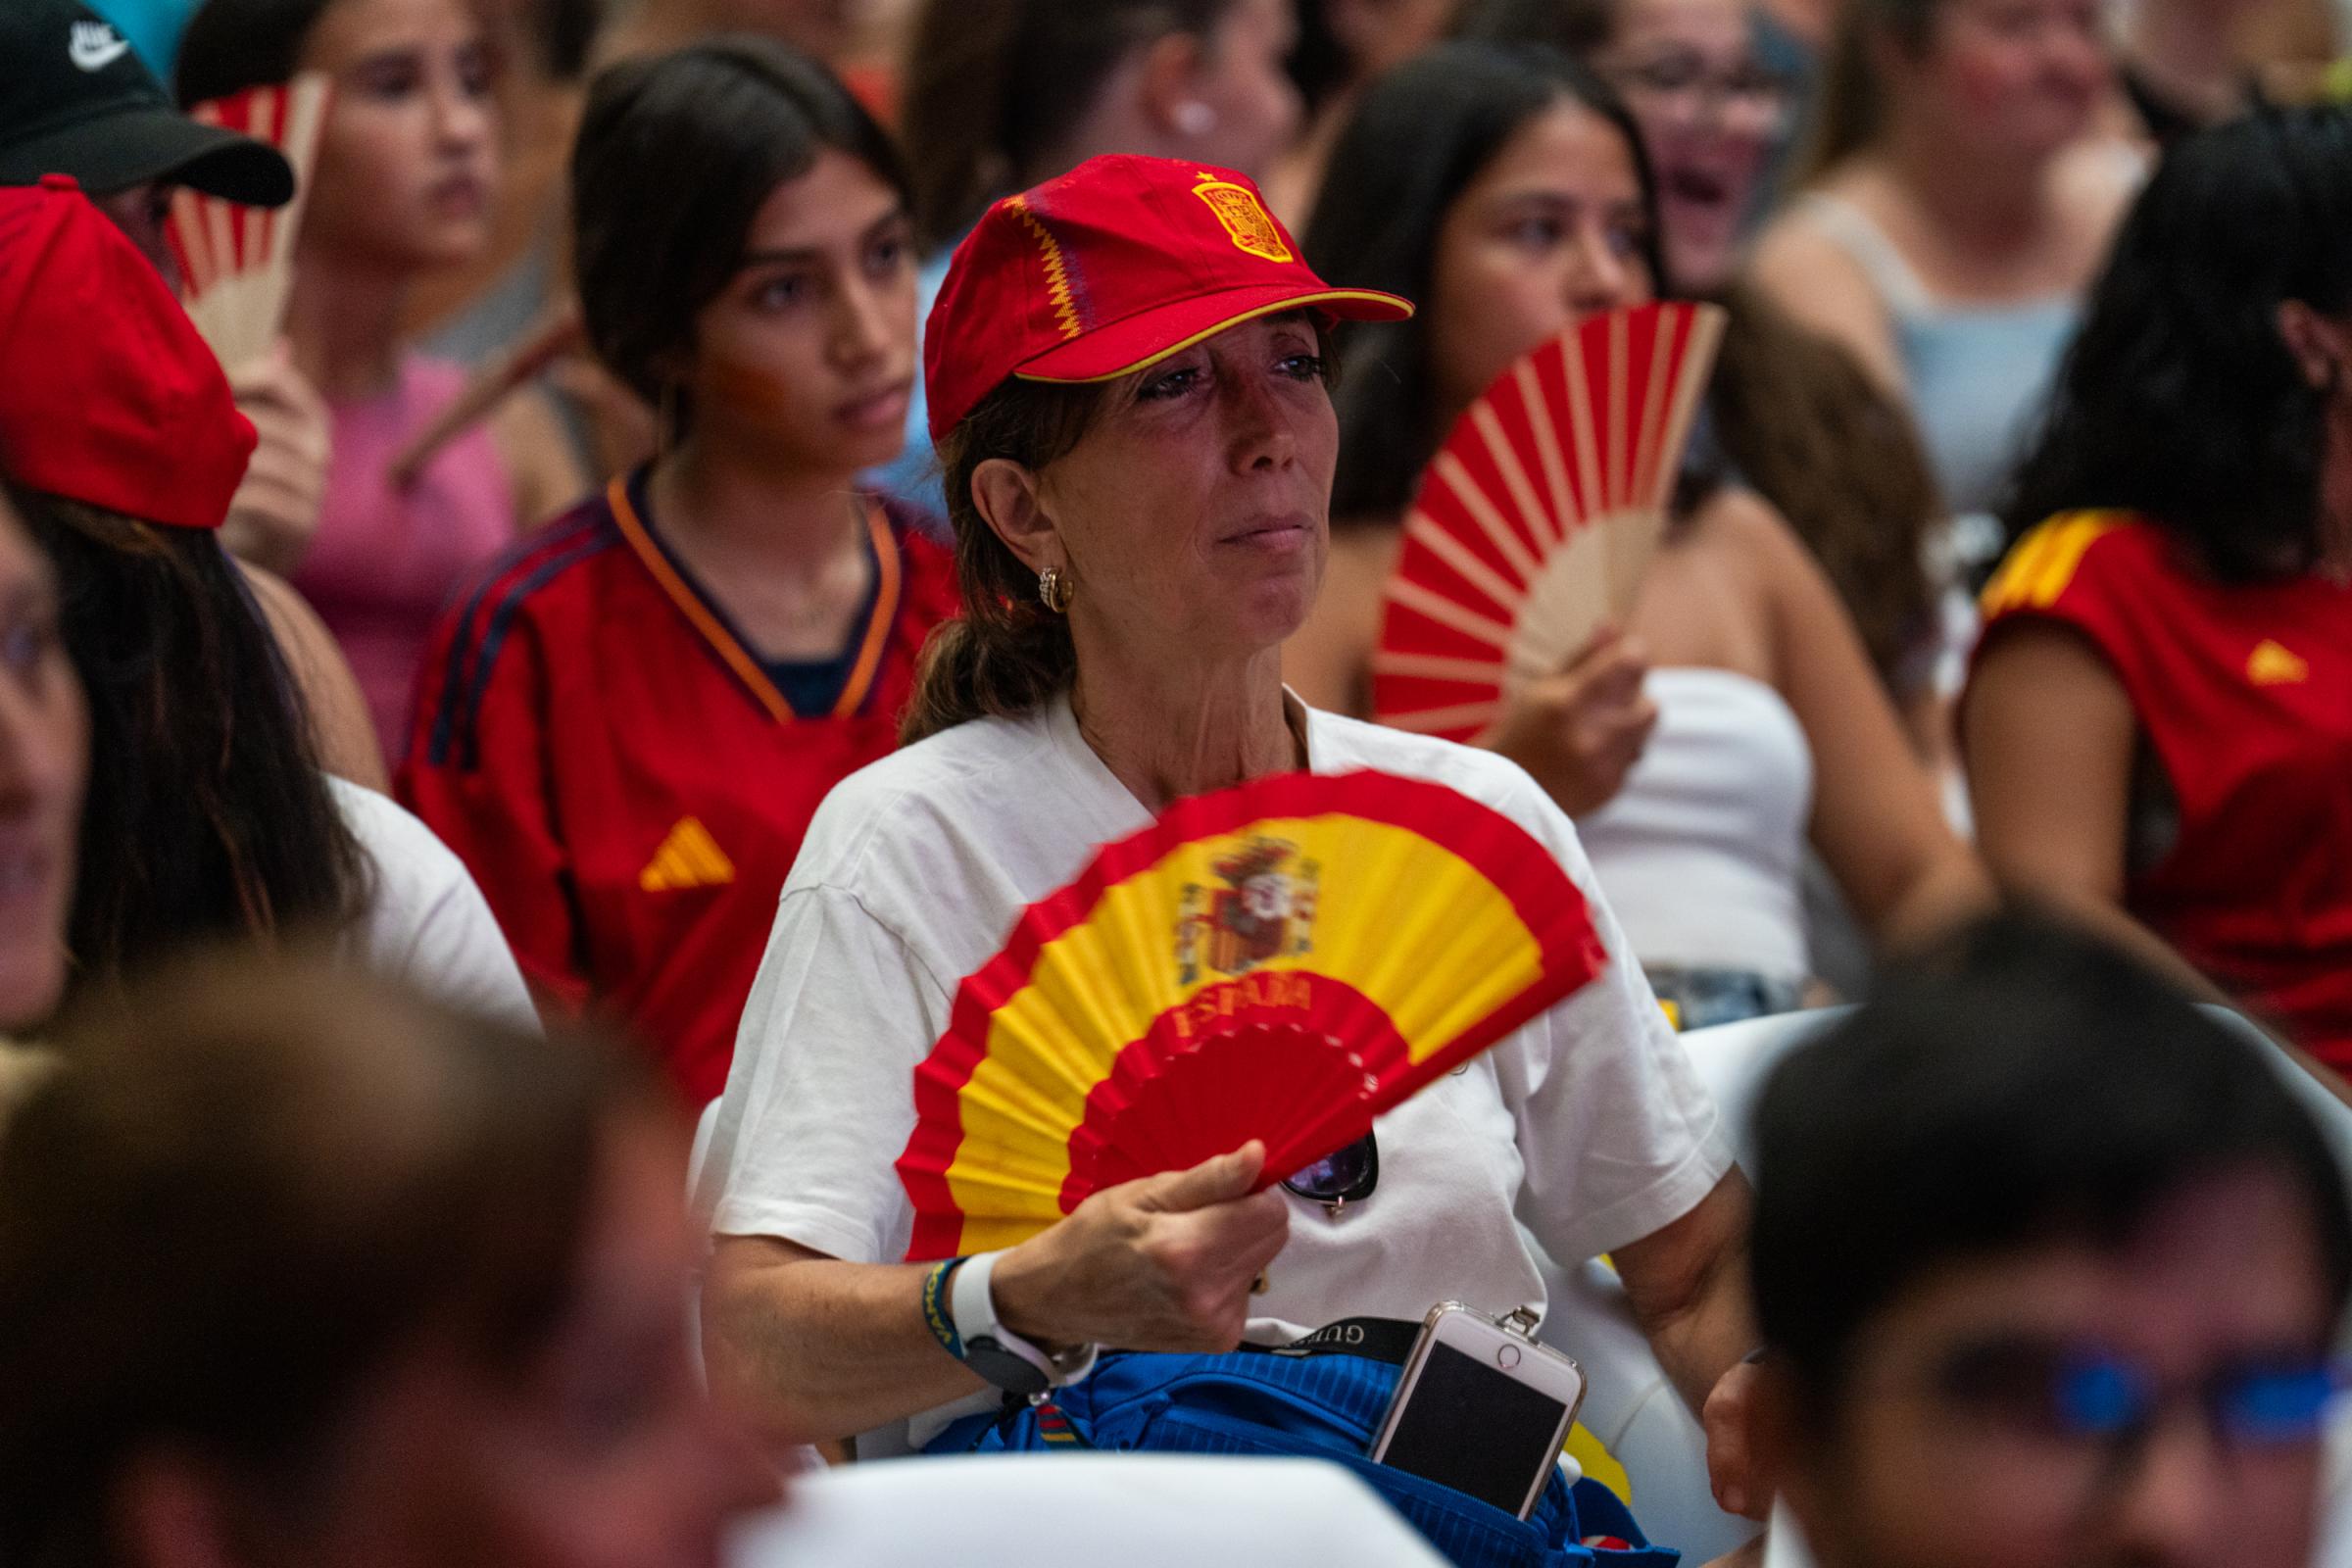 Fans Cheer For Spain As They Take On England In The Women's World Cup Final - BARCELONA, SPAIN - AUGUST 20: A fan of the Spanish...